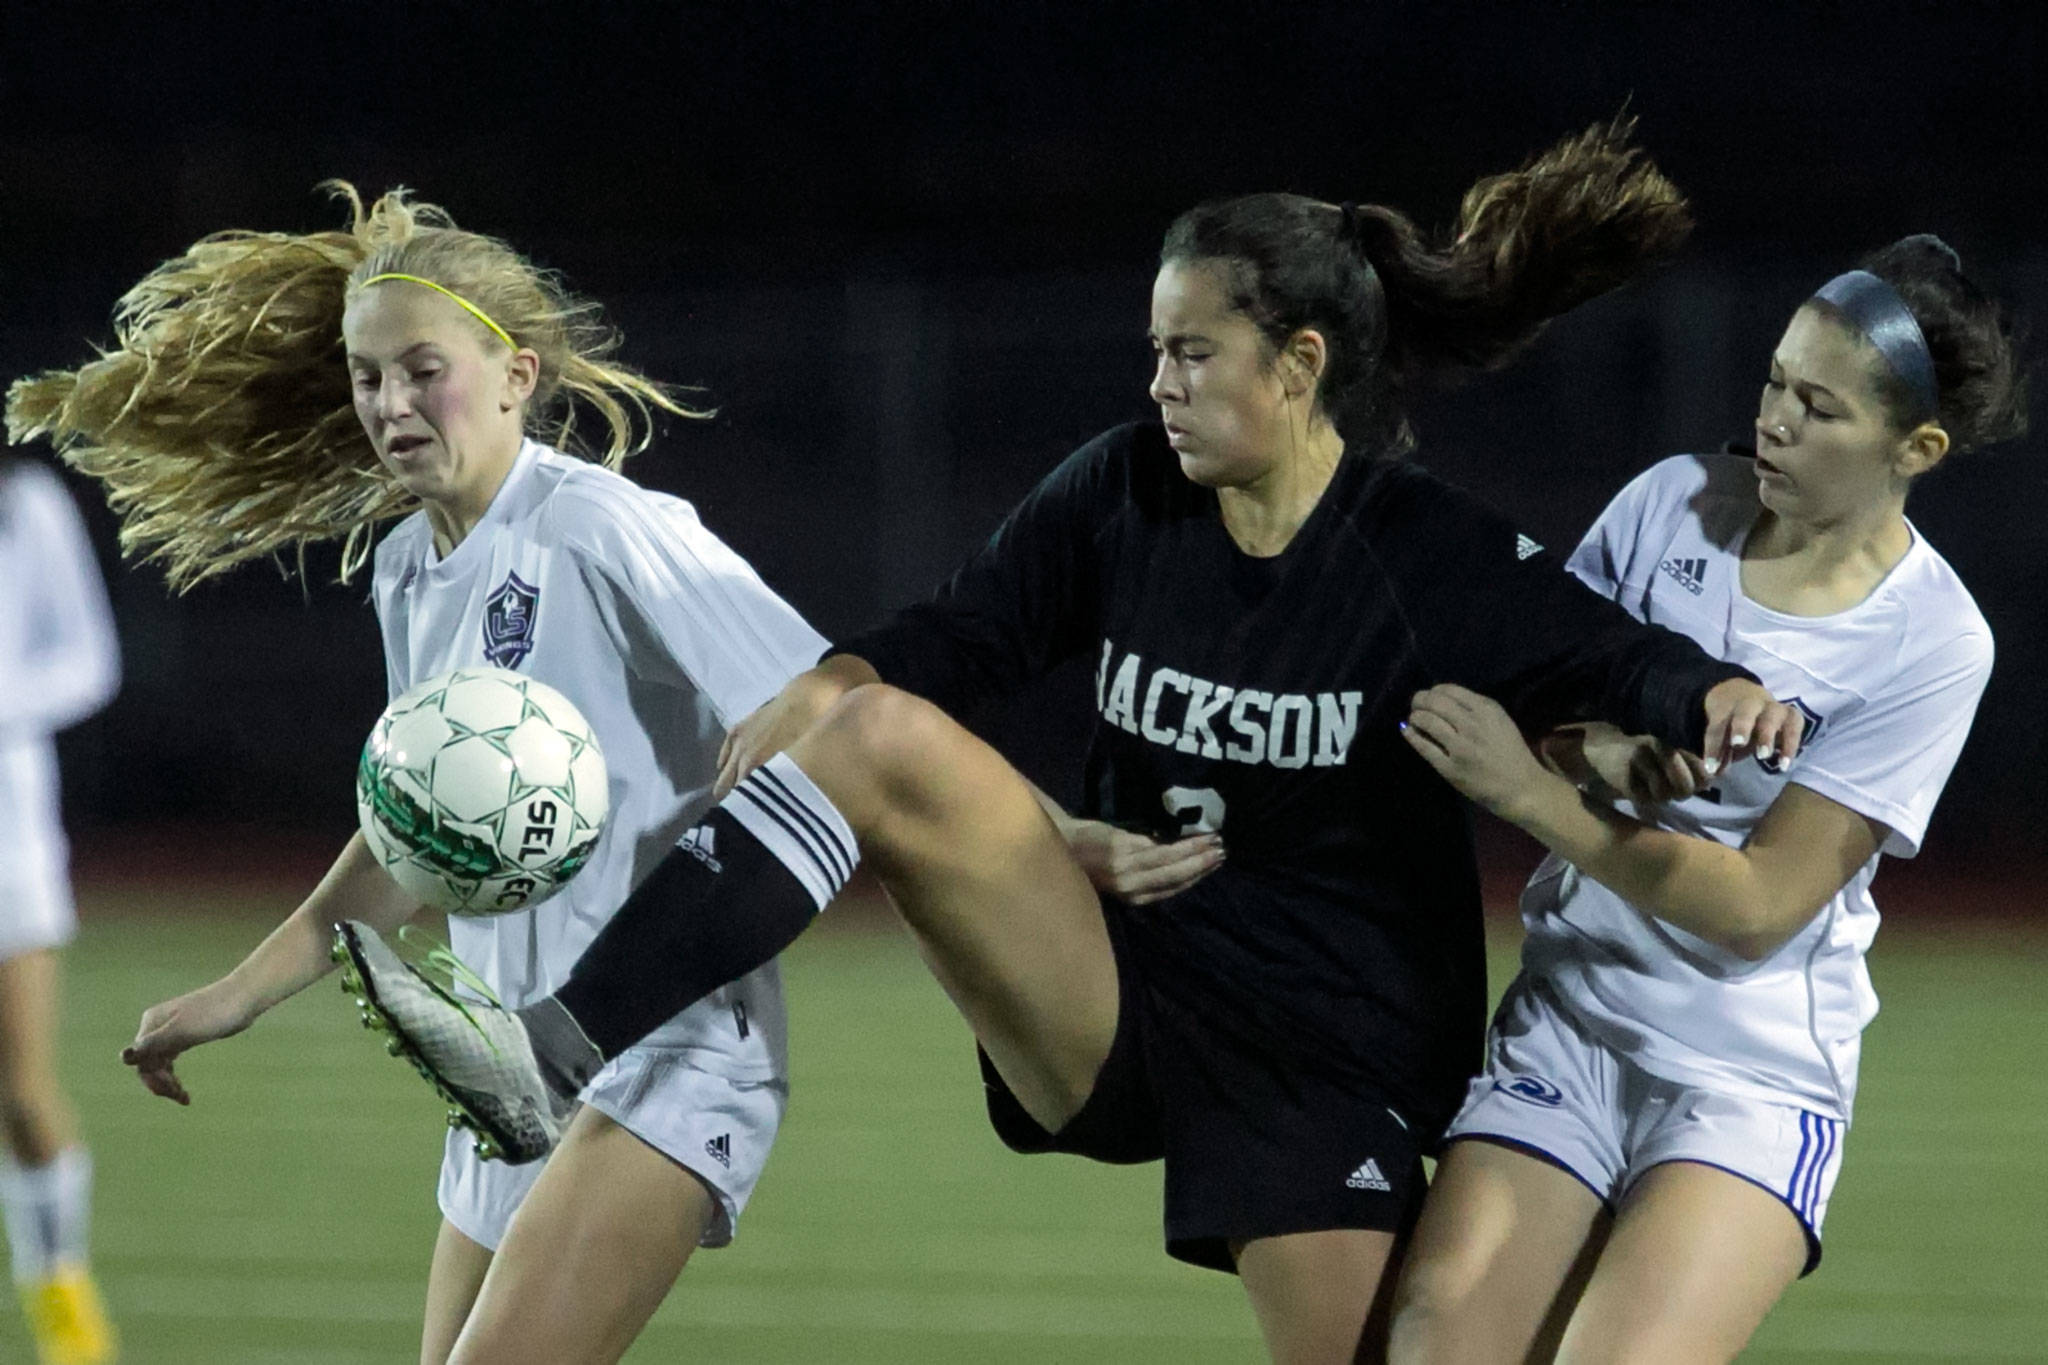 Prep girls soccer preview: 5 storylines to watch